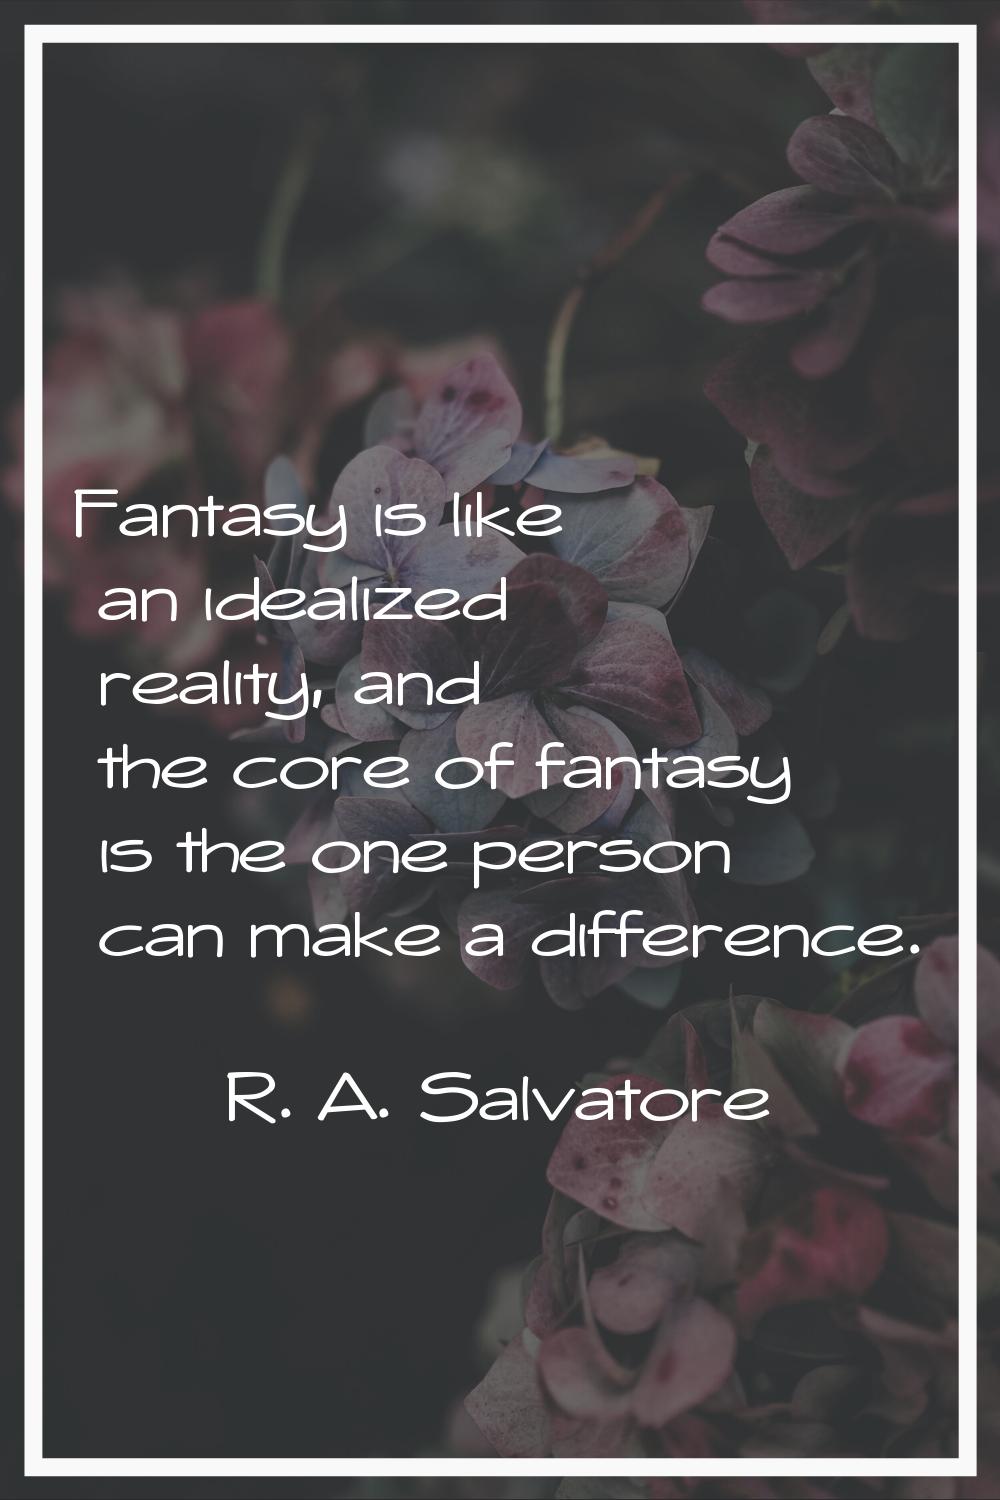 Fantasy is like an idealized reality, and the core of fantasy is the one person can make a differen